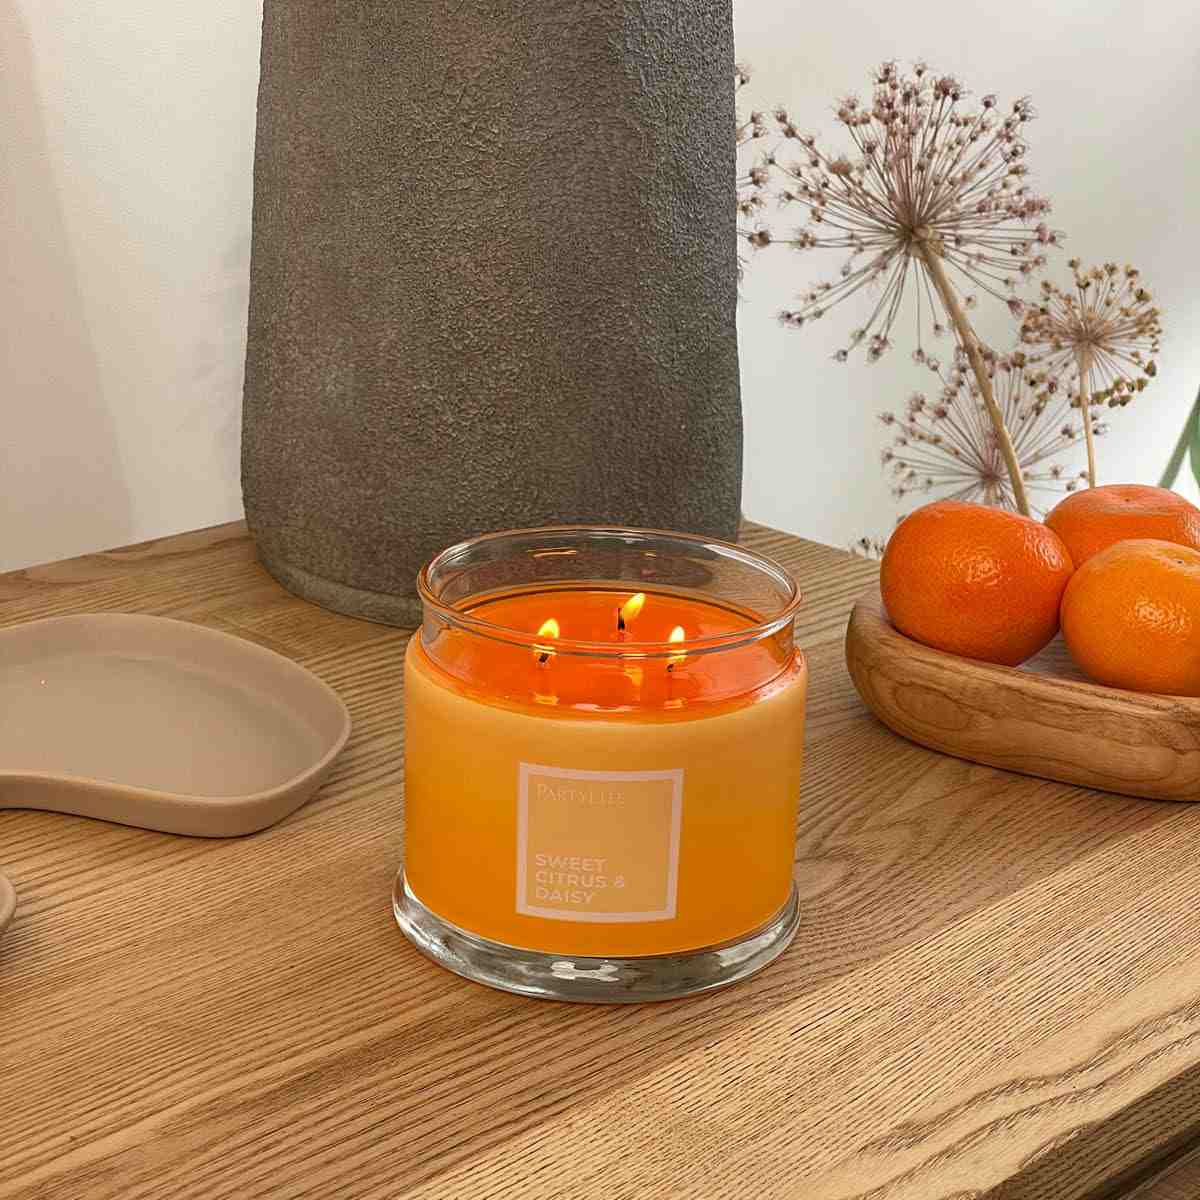 Sweet Citrus & Daisy 3-Wick Jar Candle - PartyLite US